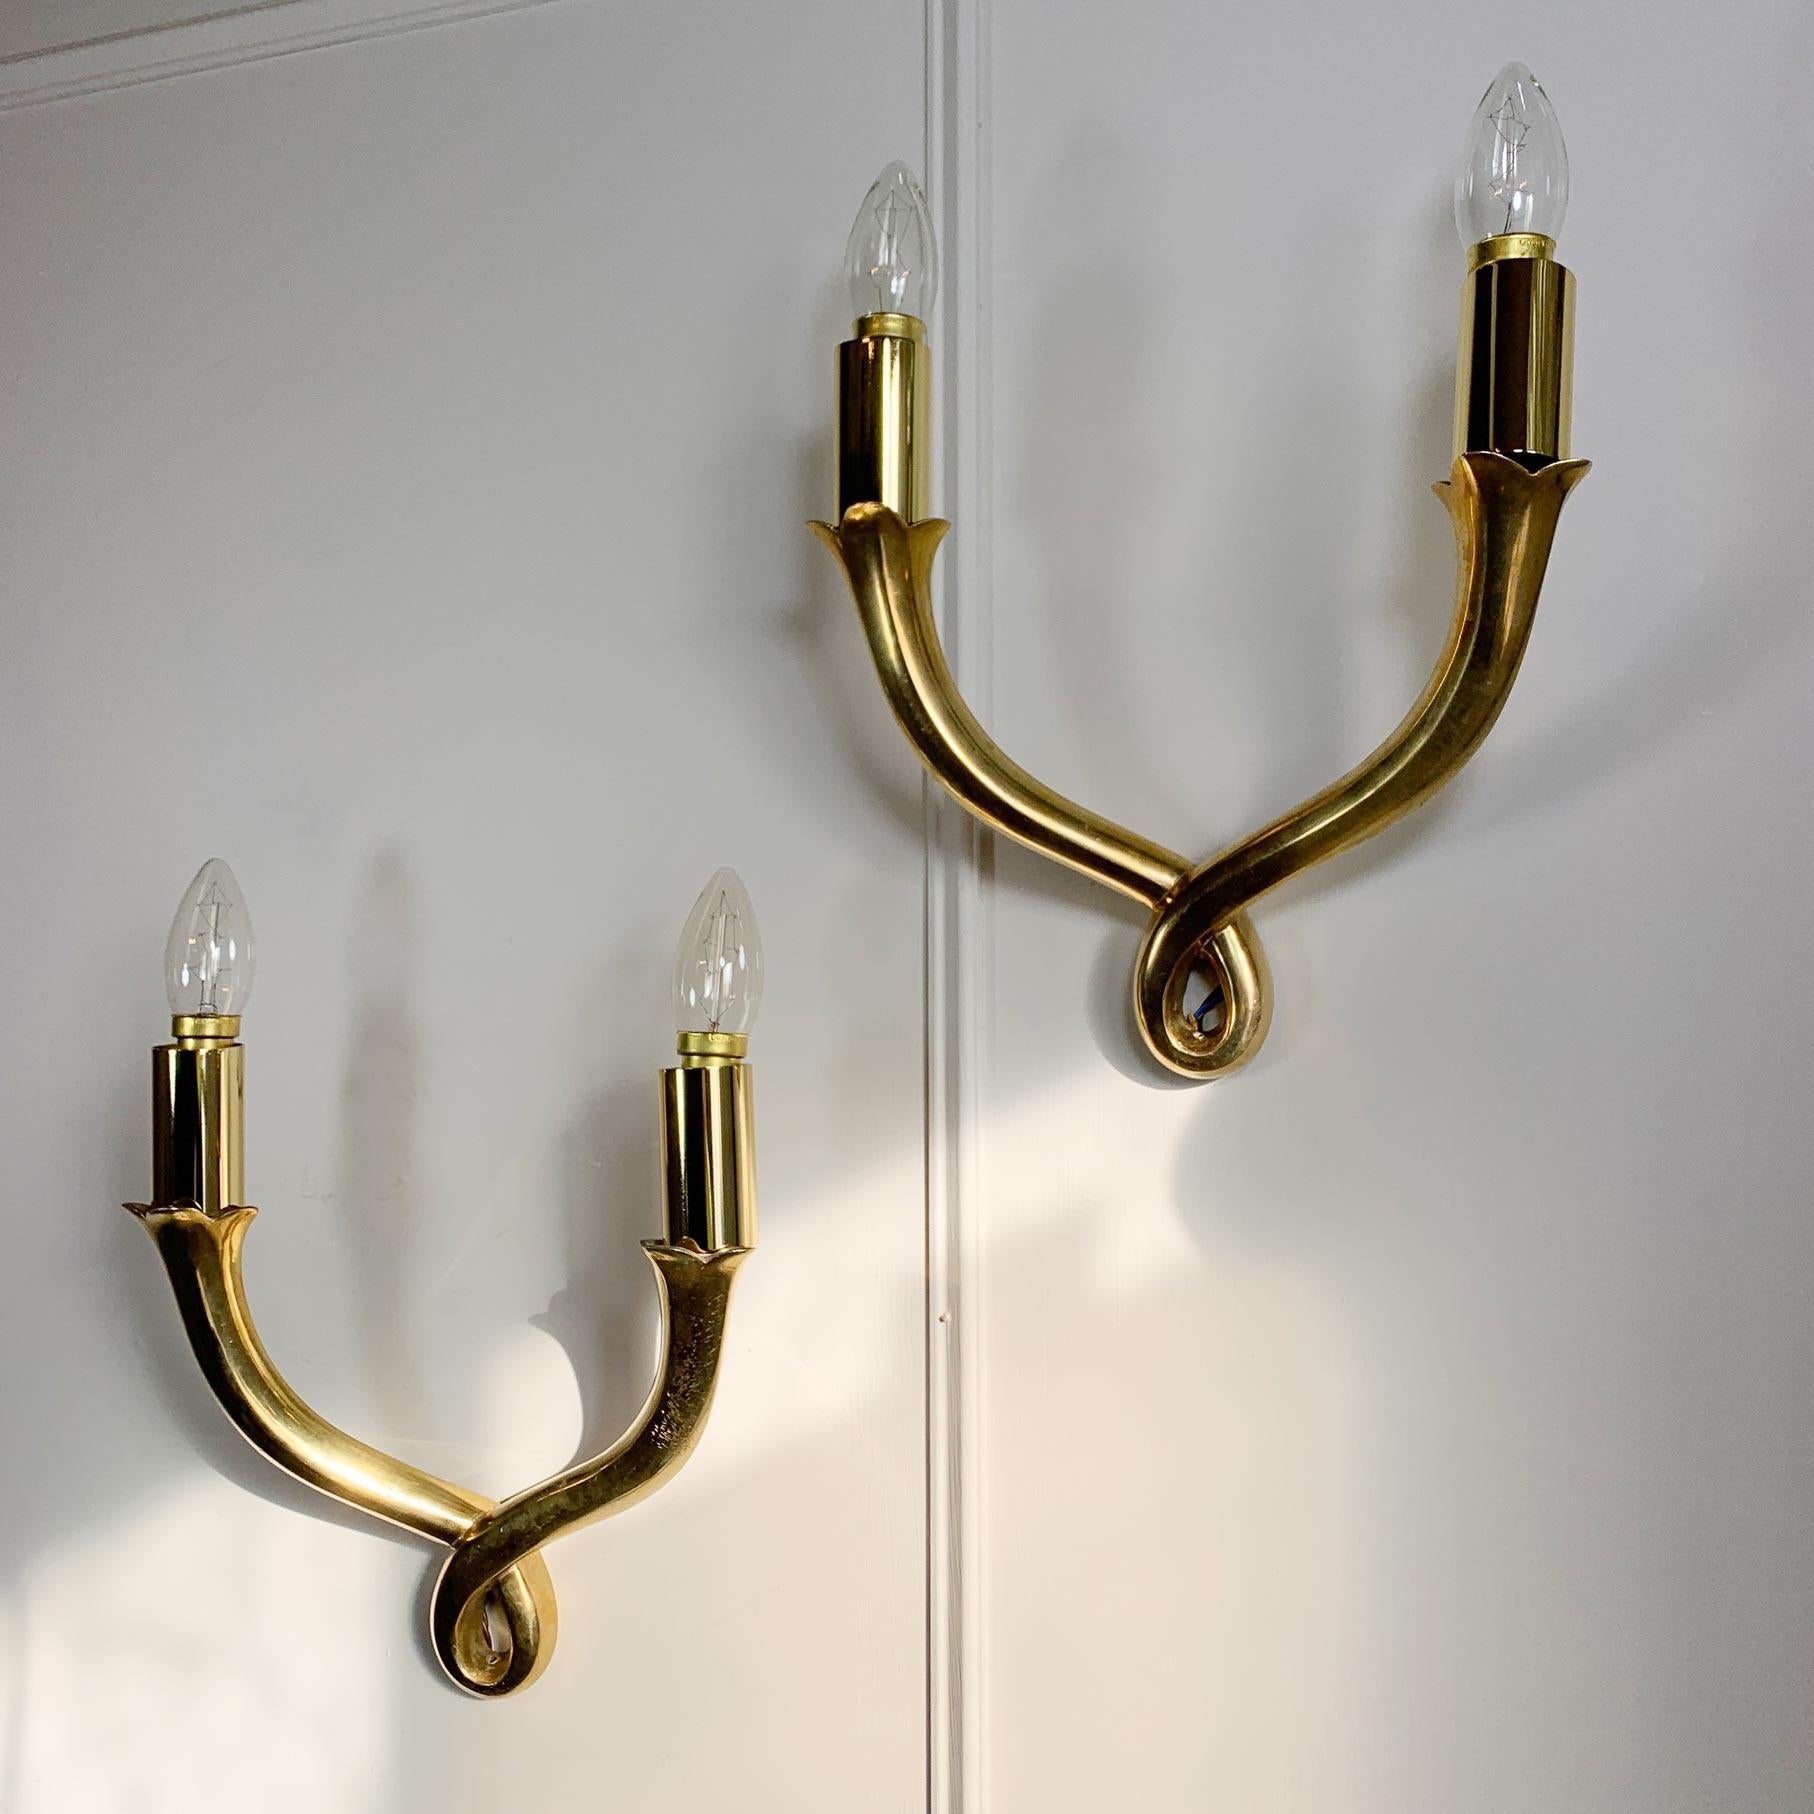 Italian Pair of Polished Bronze Wall Lights by Riccardo Scarpa Fully Signed